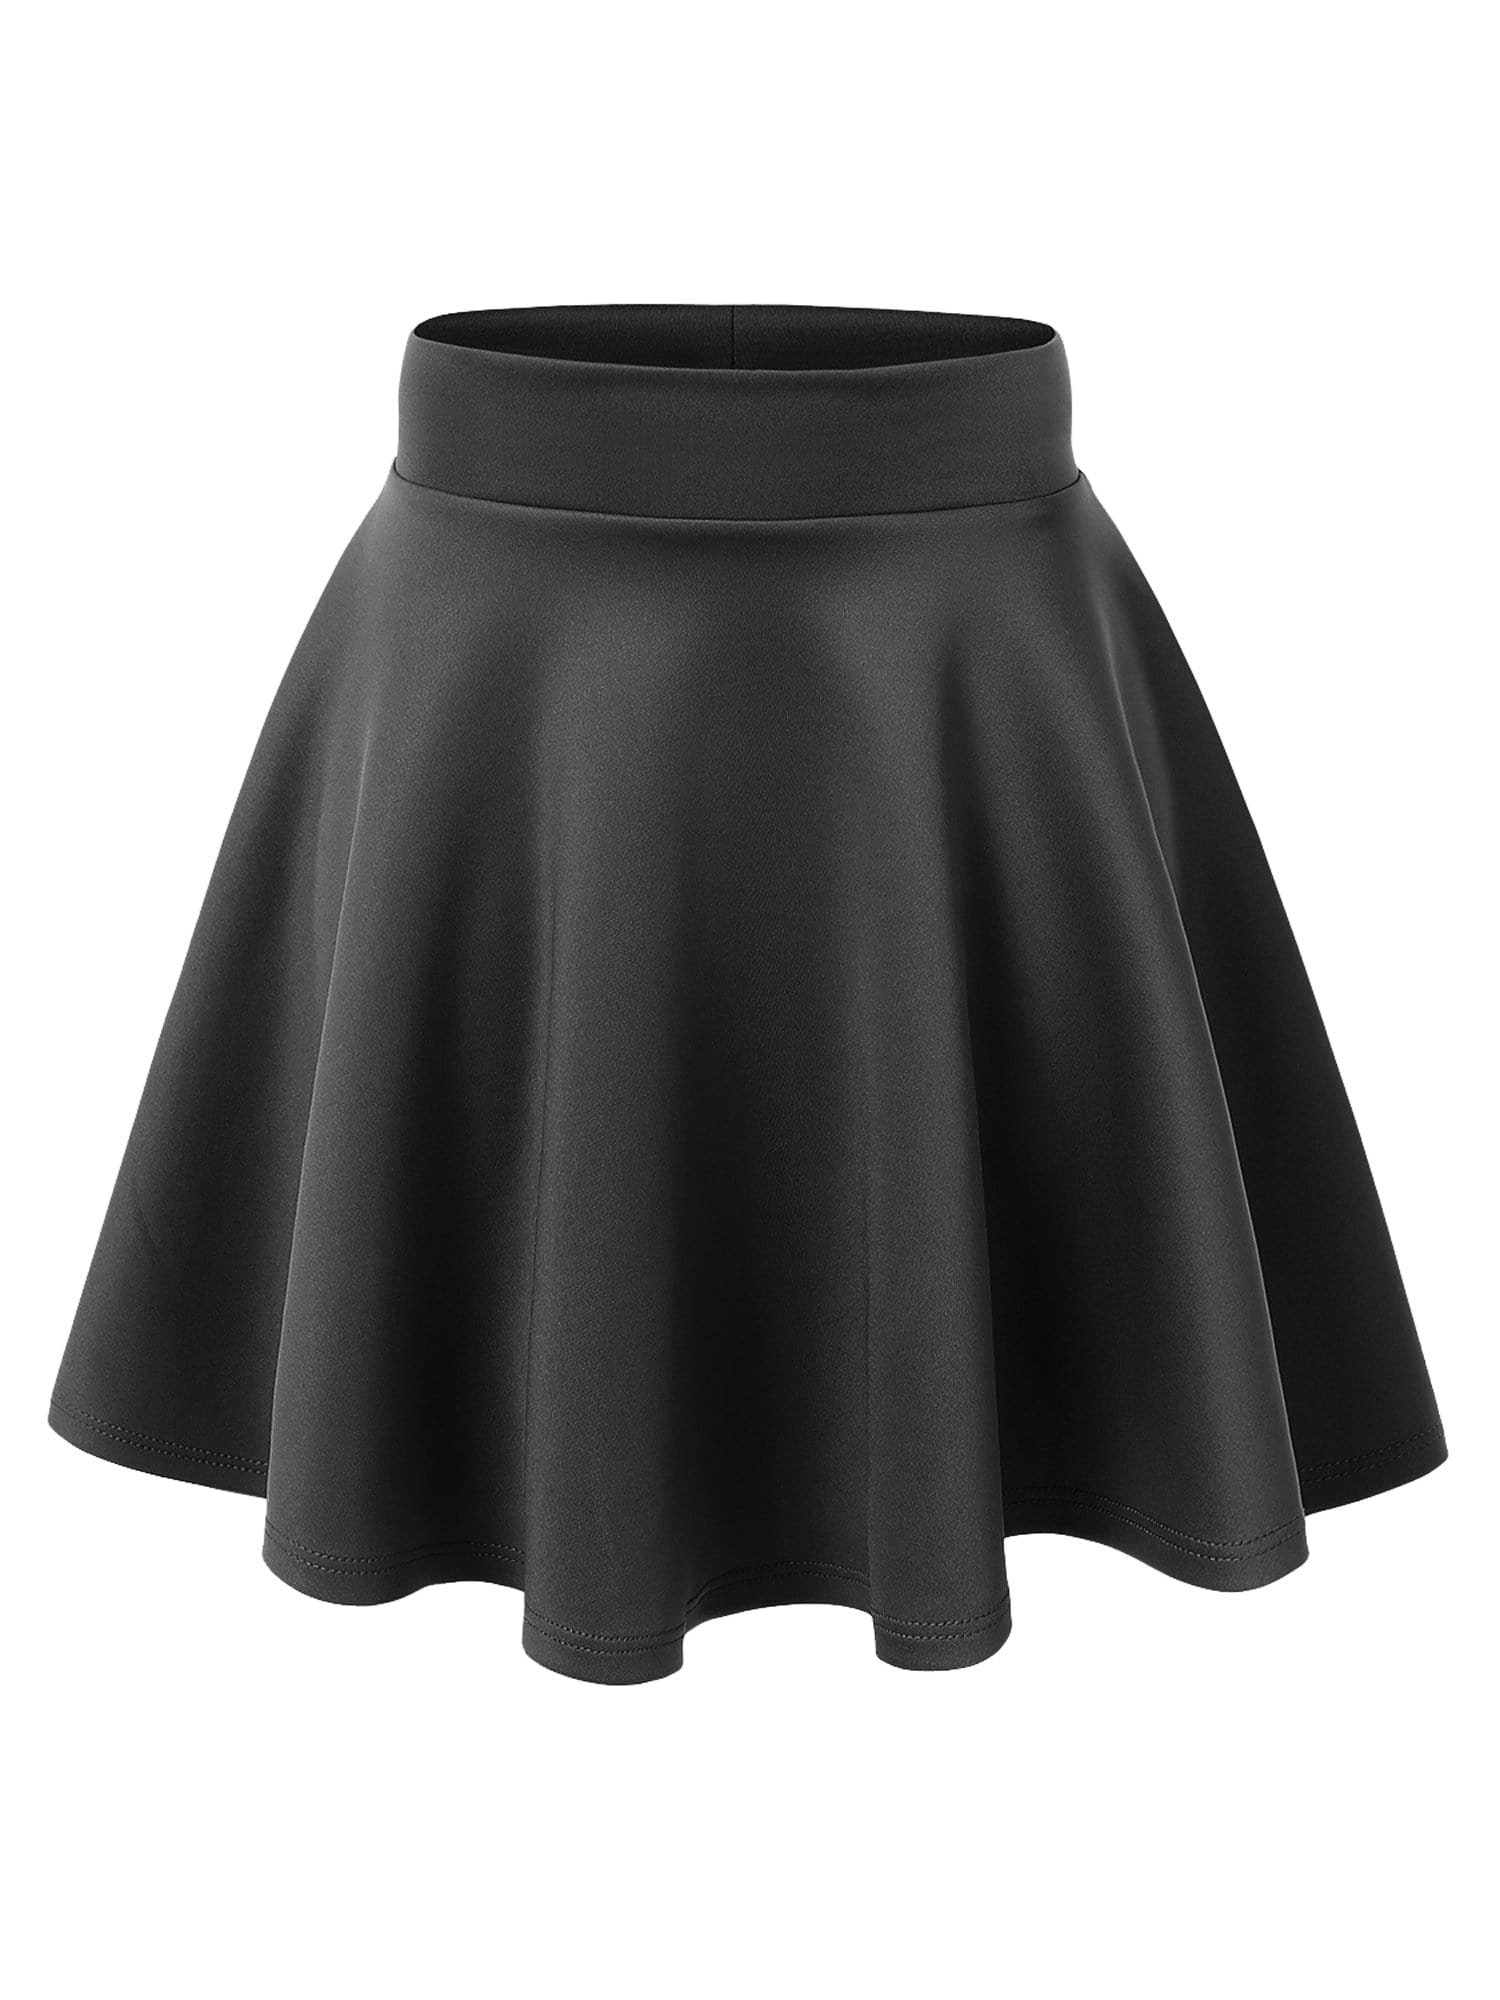 Skater Skirt Kids Casual Party and School Wear Grey Skirts Girls 7 to –  voice7uniform